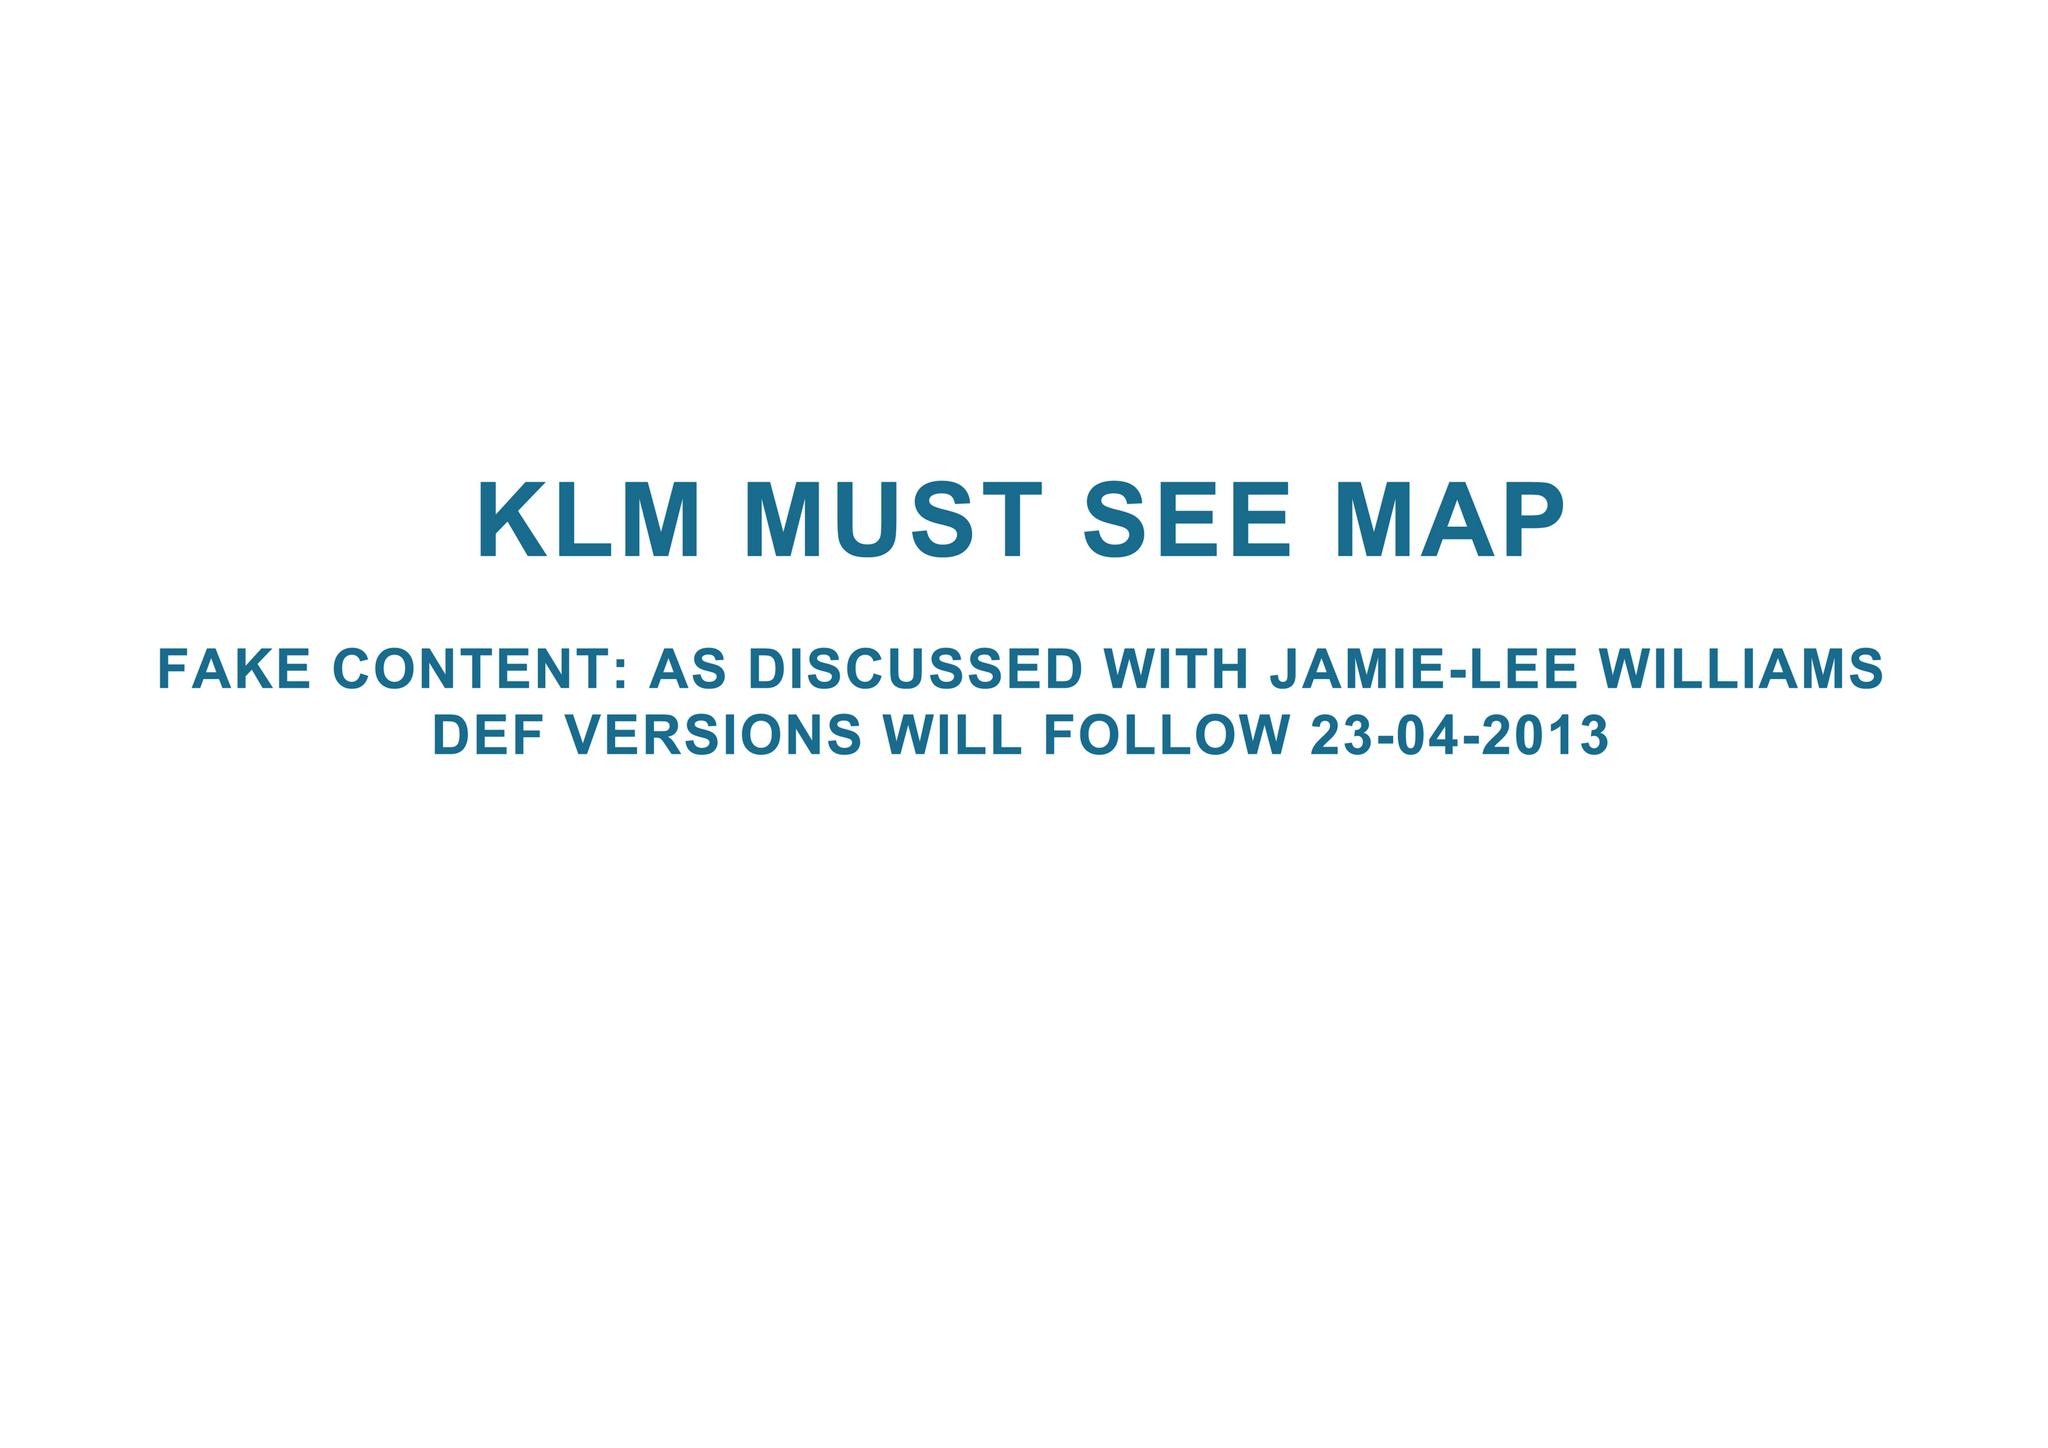 KLM MUST SEE MAP